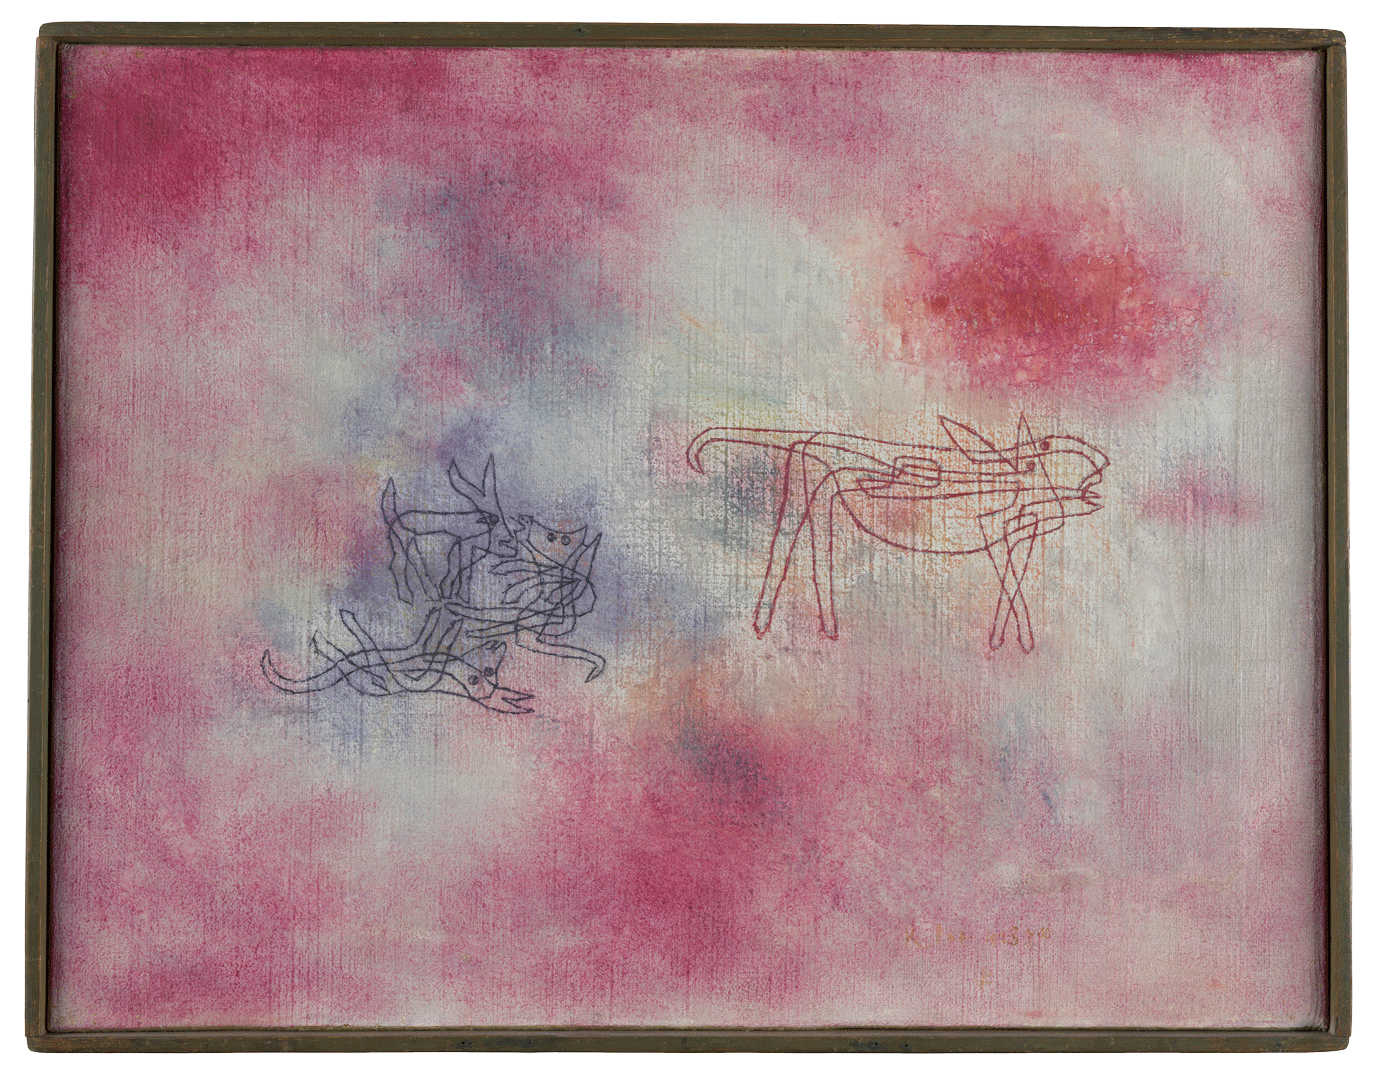 A painting by Paul Klee, titled Sie br√ºllt, wir spielen, 1928, 70 She Bellow, We Play, 1928, 70, dated 1928.